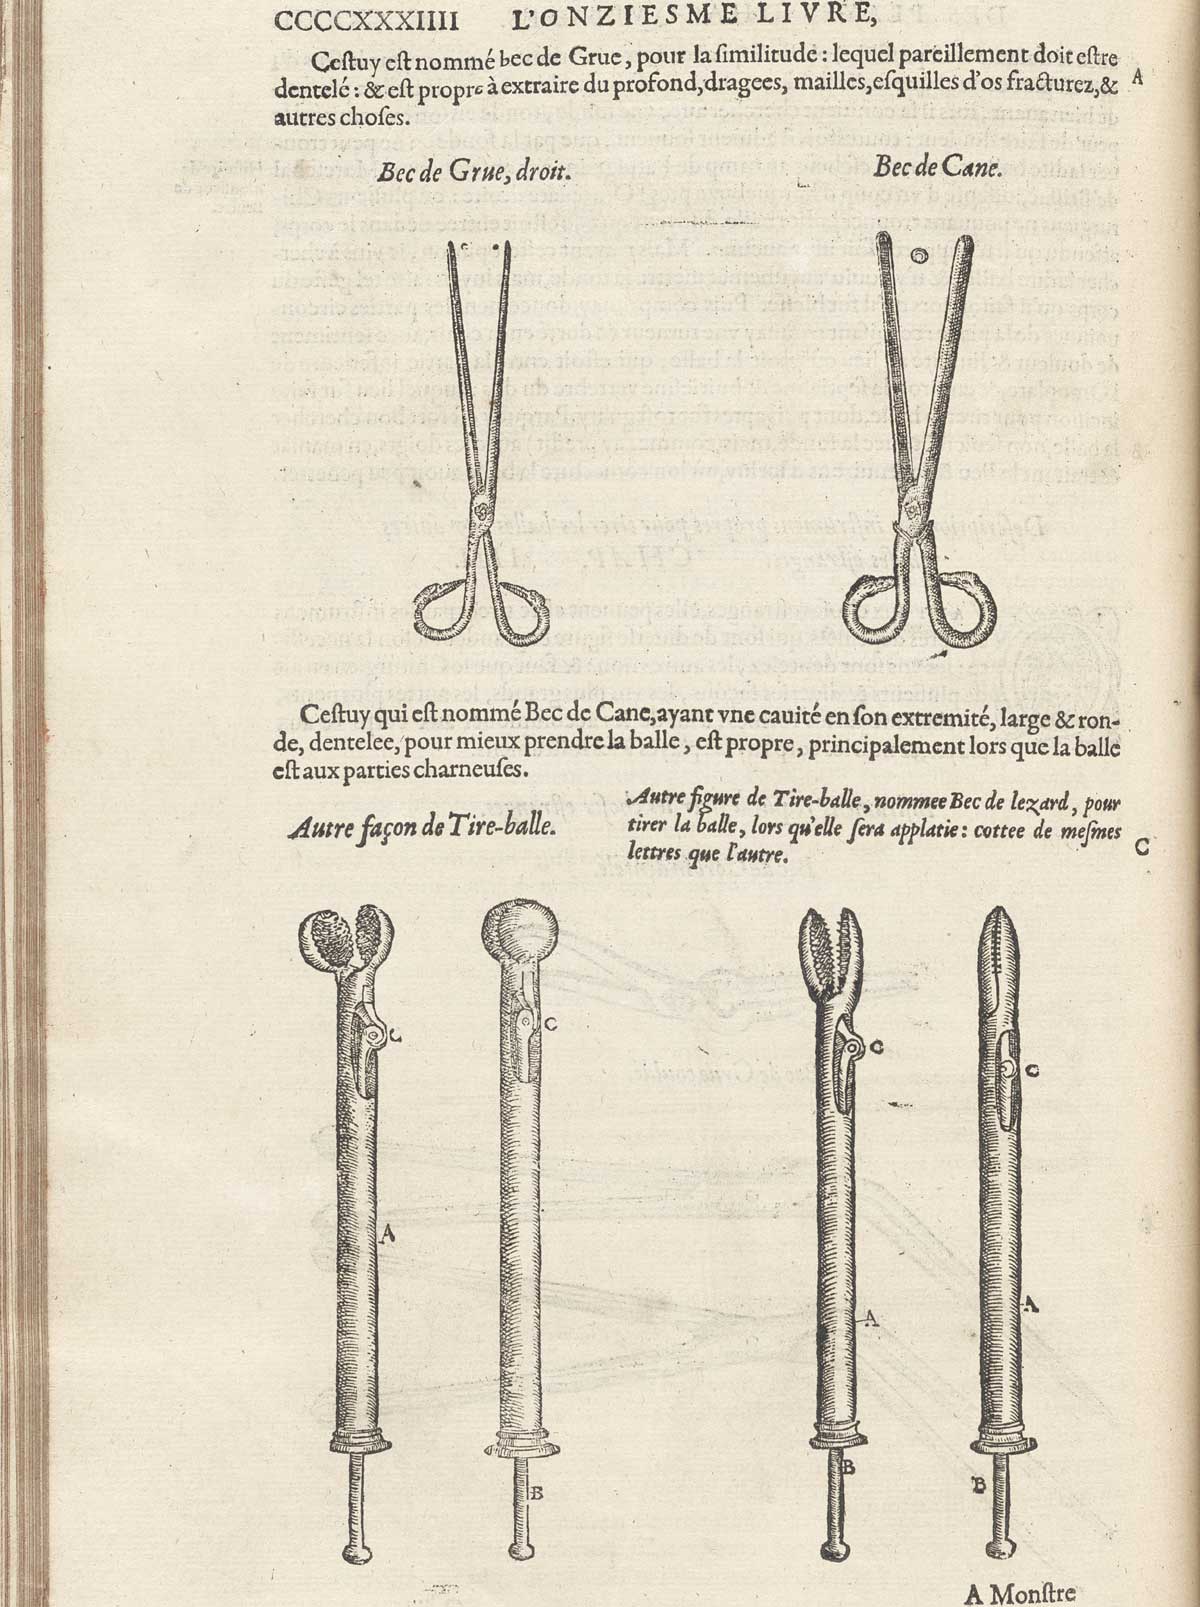 Page CCCCXXXIIII which features surgeon's tools made like a crane bill and a duck bill (Bec de Cane), and an instrument to pull bullets from a body (Tire-balle).